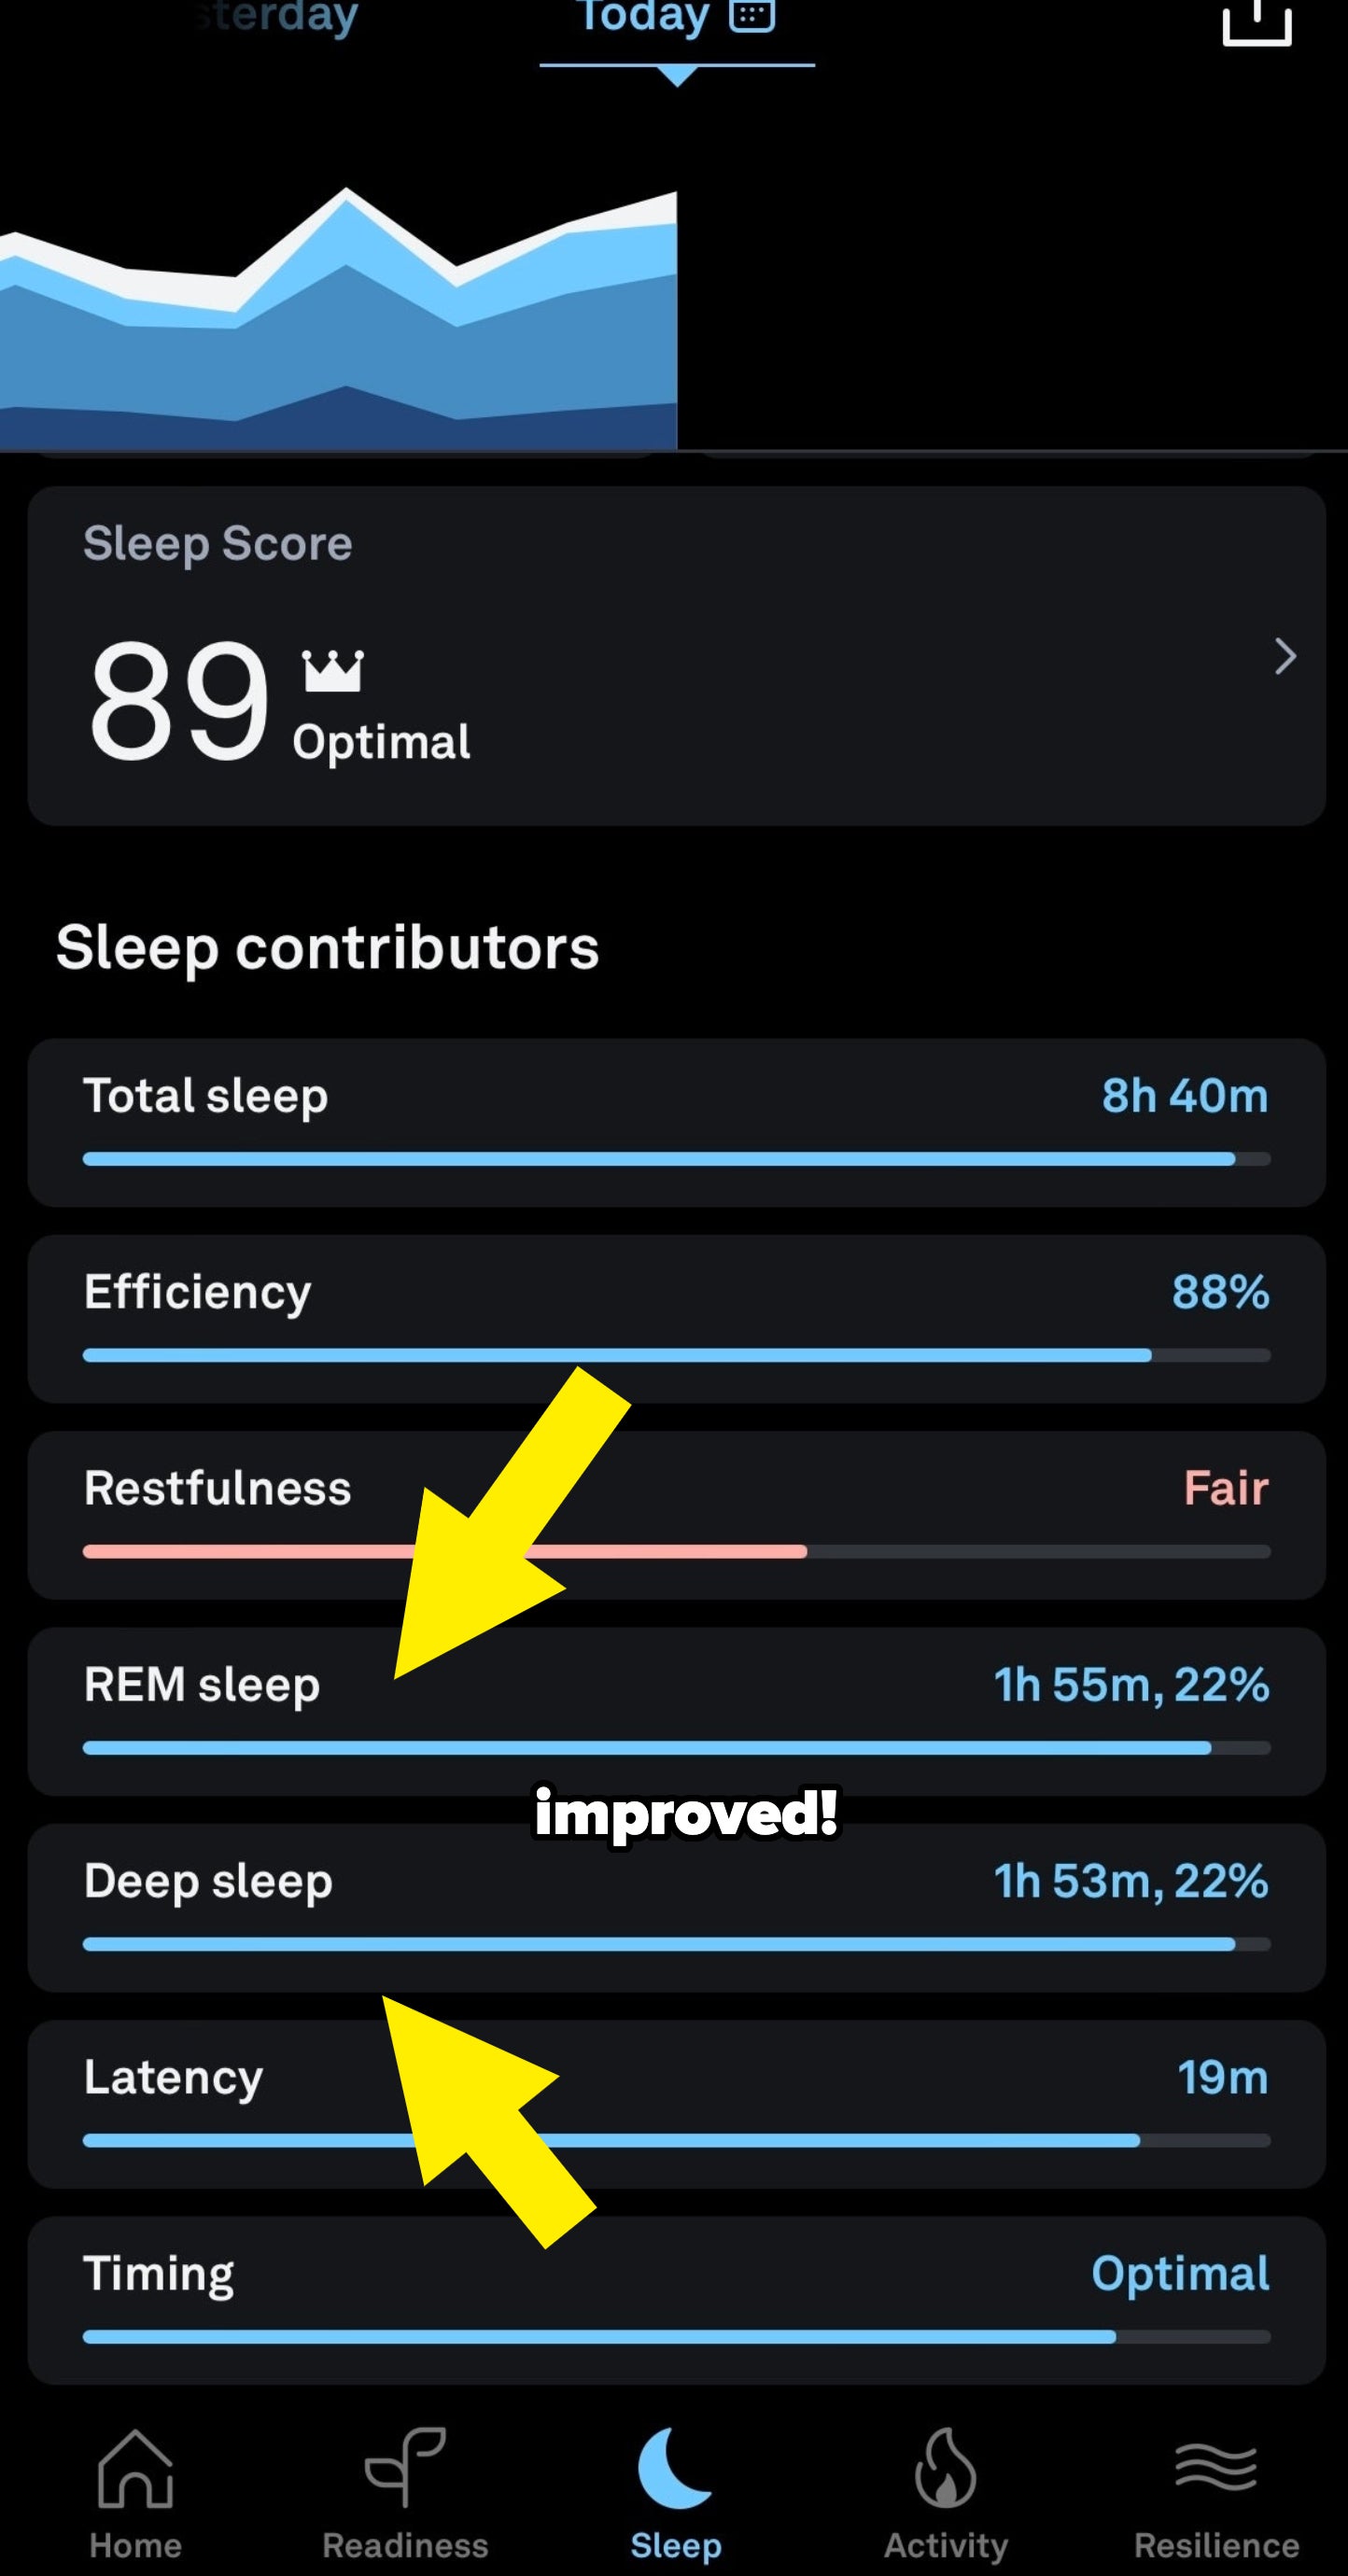 Sleep tracking app interface showing statistics on sleep quality, efficiency, and stages, with a graph overview